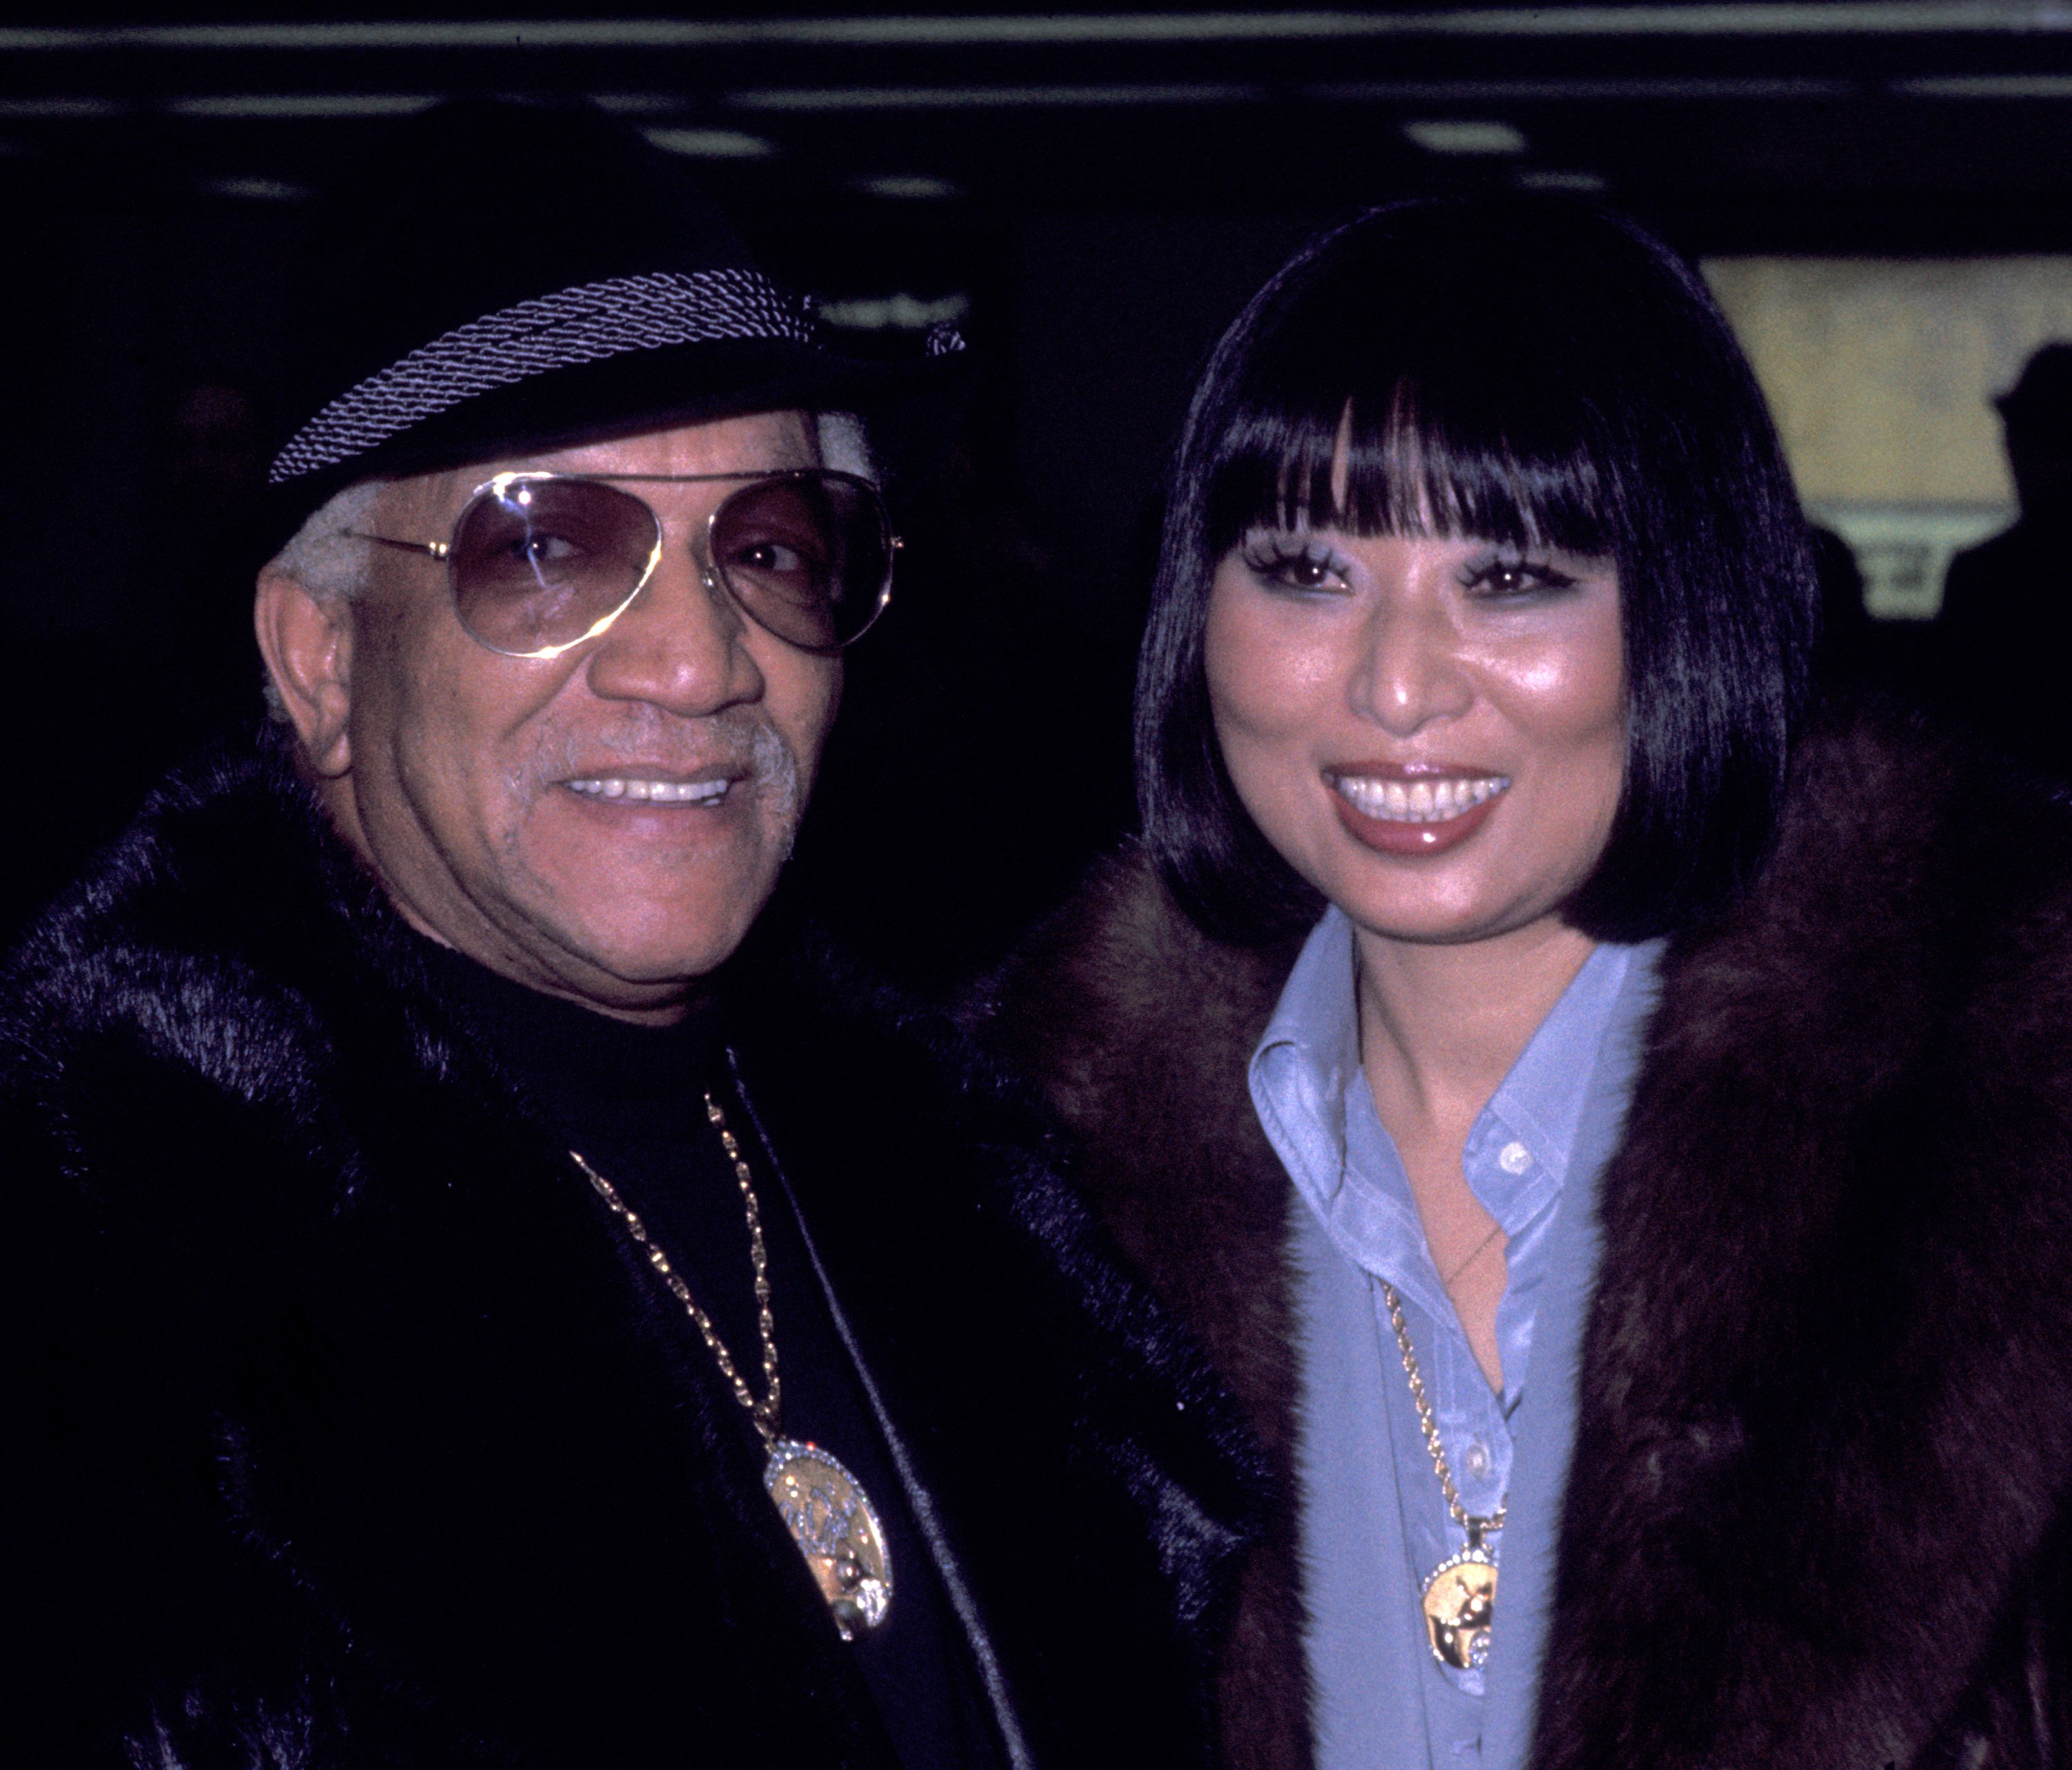  Redd Foxx and wife Yun Chi Chung at Dulles International Airport on January 18, 1977 in Washington, D.C. | Photo: Getty Images